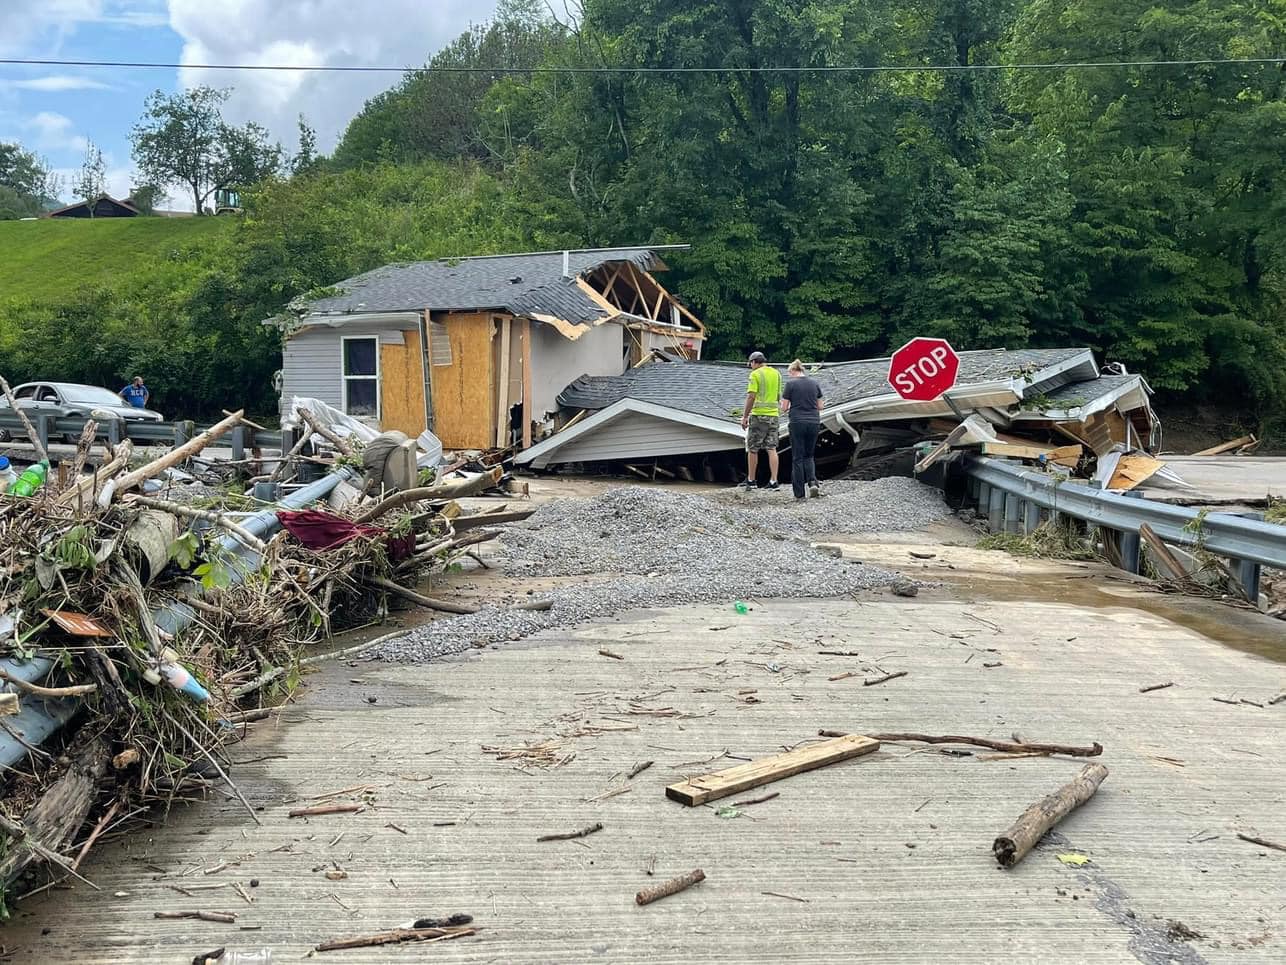 A house was destroyed by flash flooding on Steer Fork Rd in Pinetop, KY